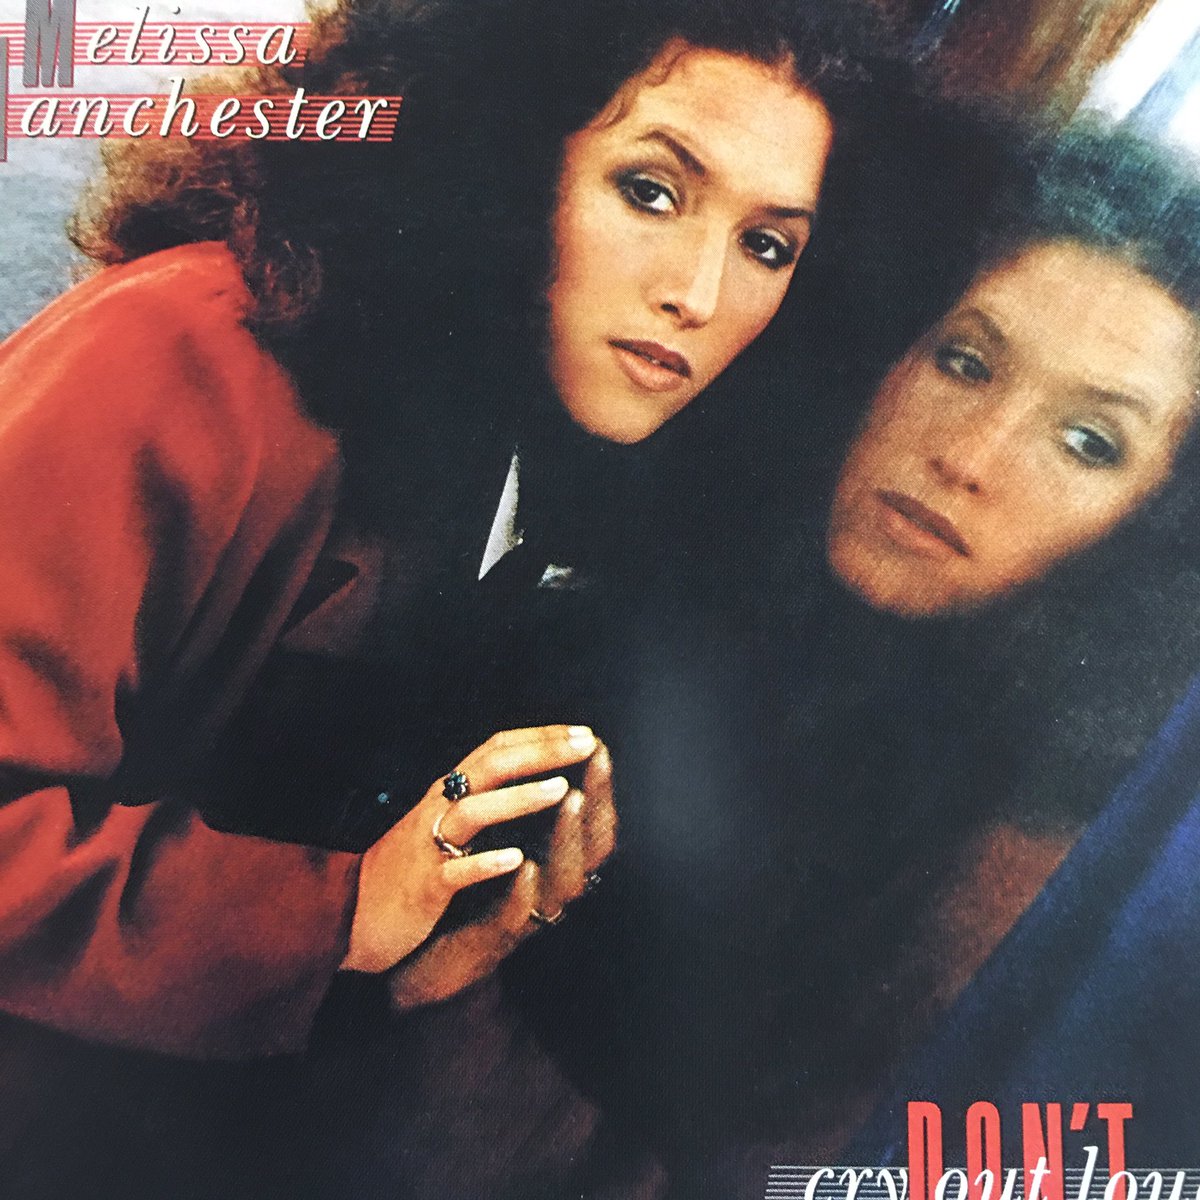 Melissa Manchester - Don't Cry Out Loud youtu.be/MCM7dViMX8Y 

#TOTOsession 
#DavidHungate

🥁#JimKeltner